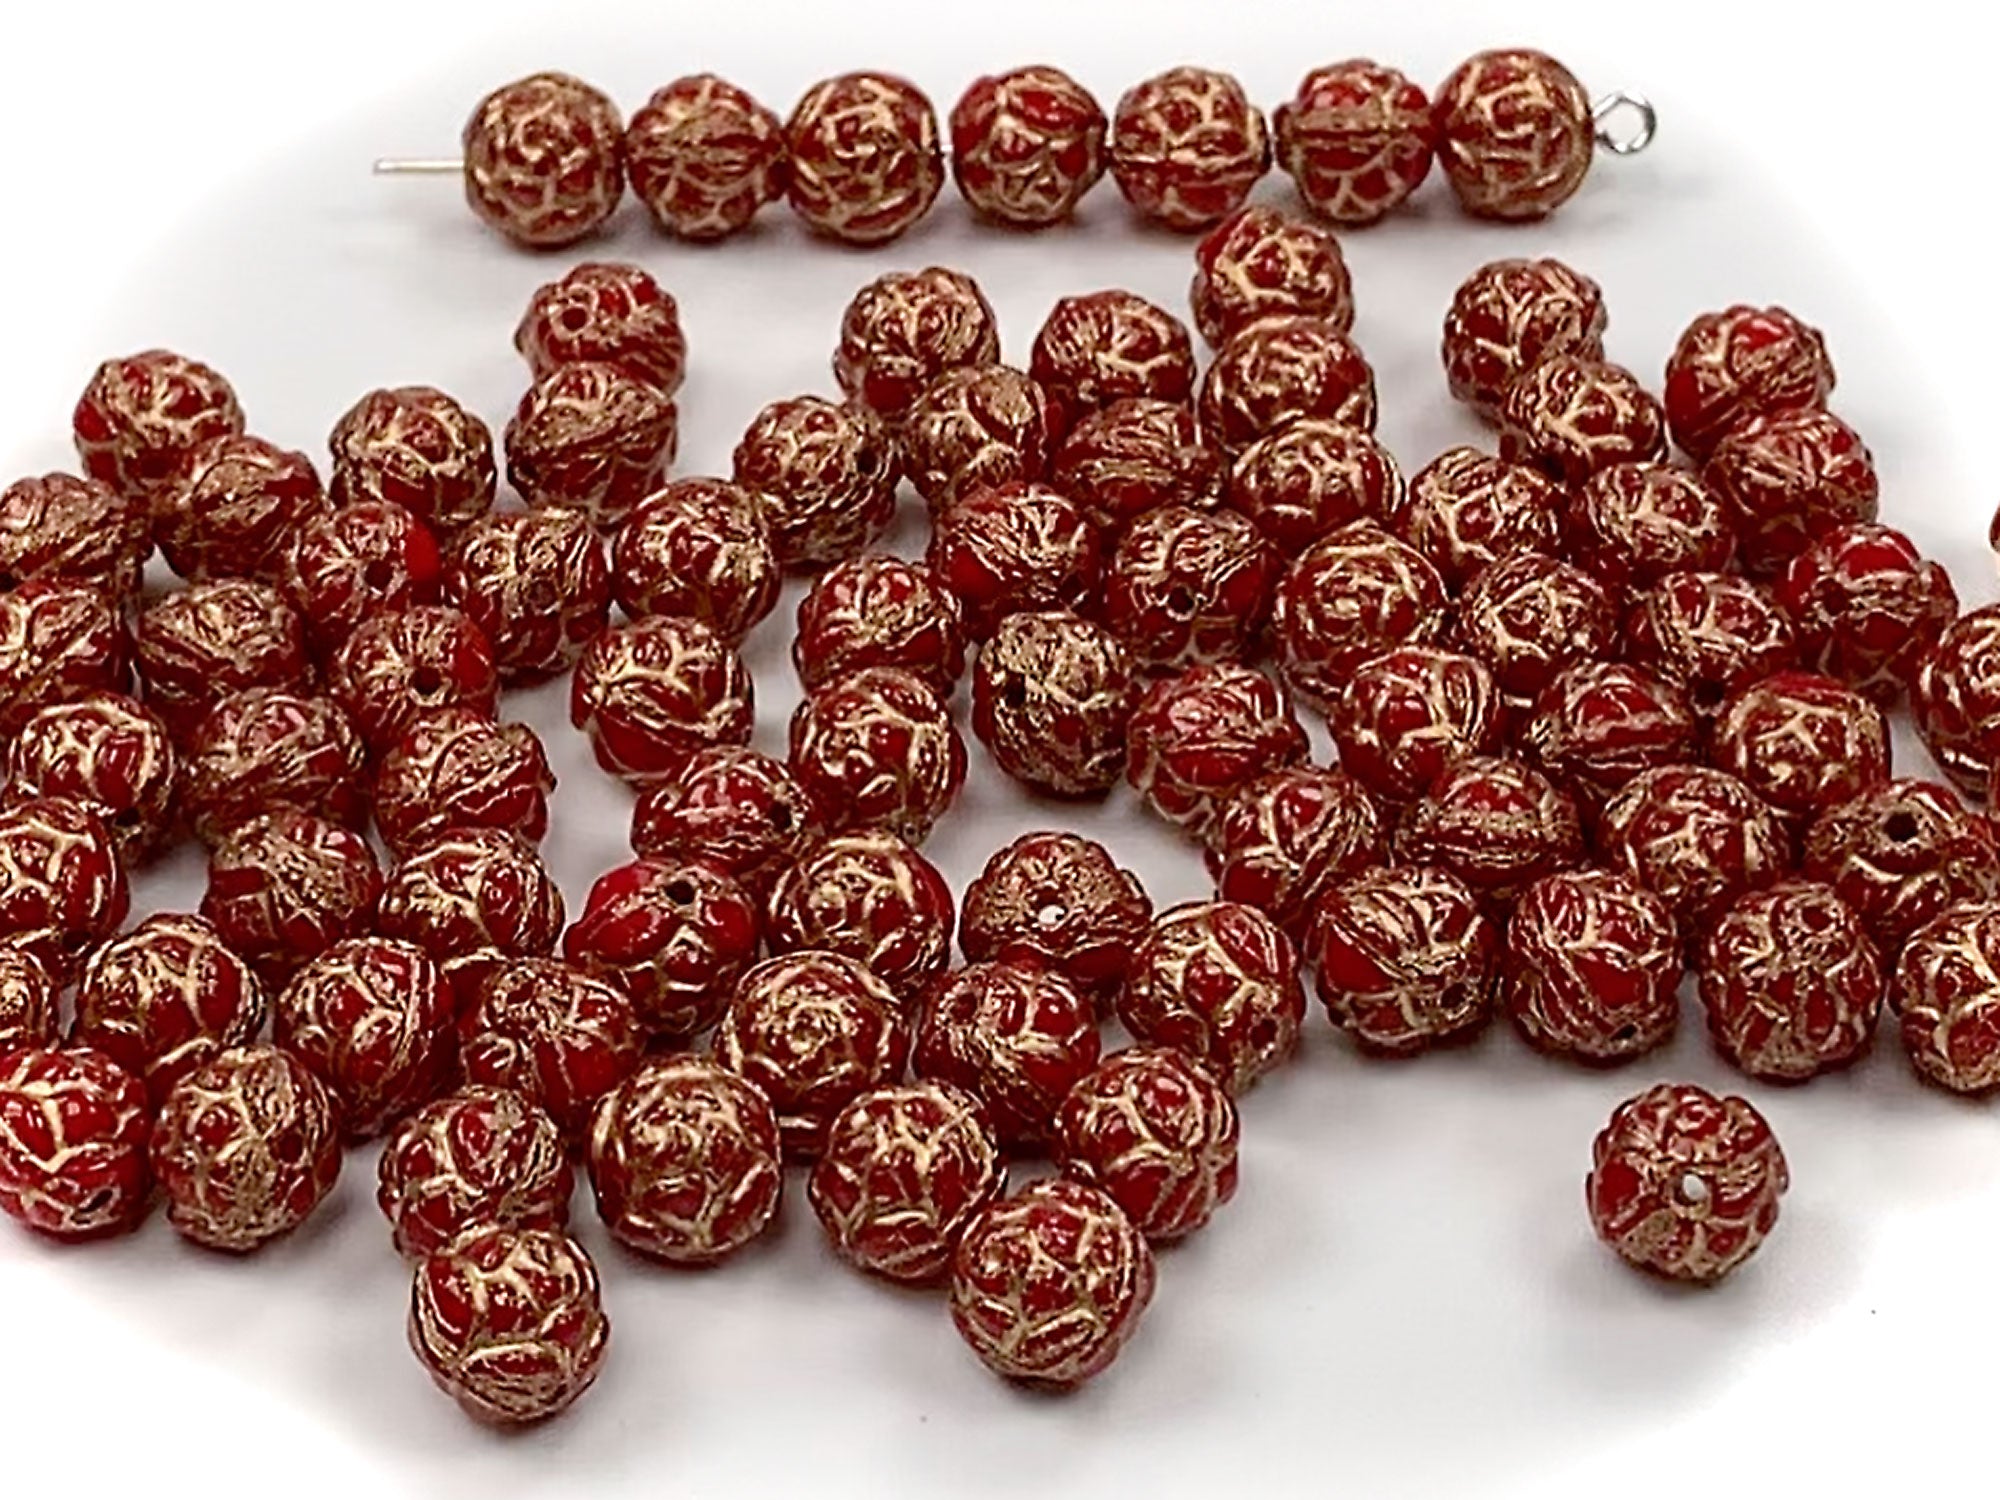 Czech Glass Druk Beads in size 7mm, Rose Bead, Rich Red color with Gold Painted Rose, 30pcs, P900